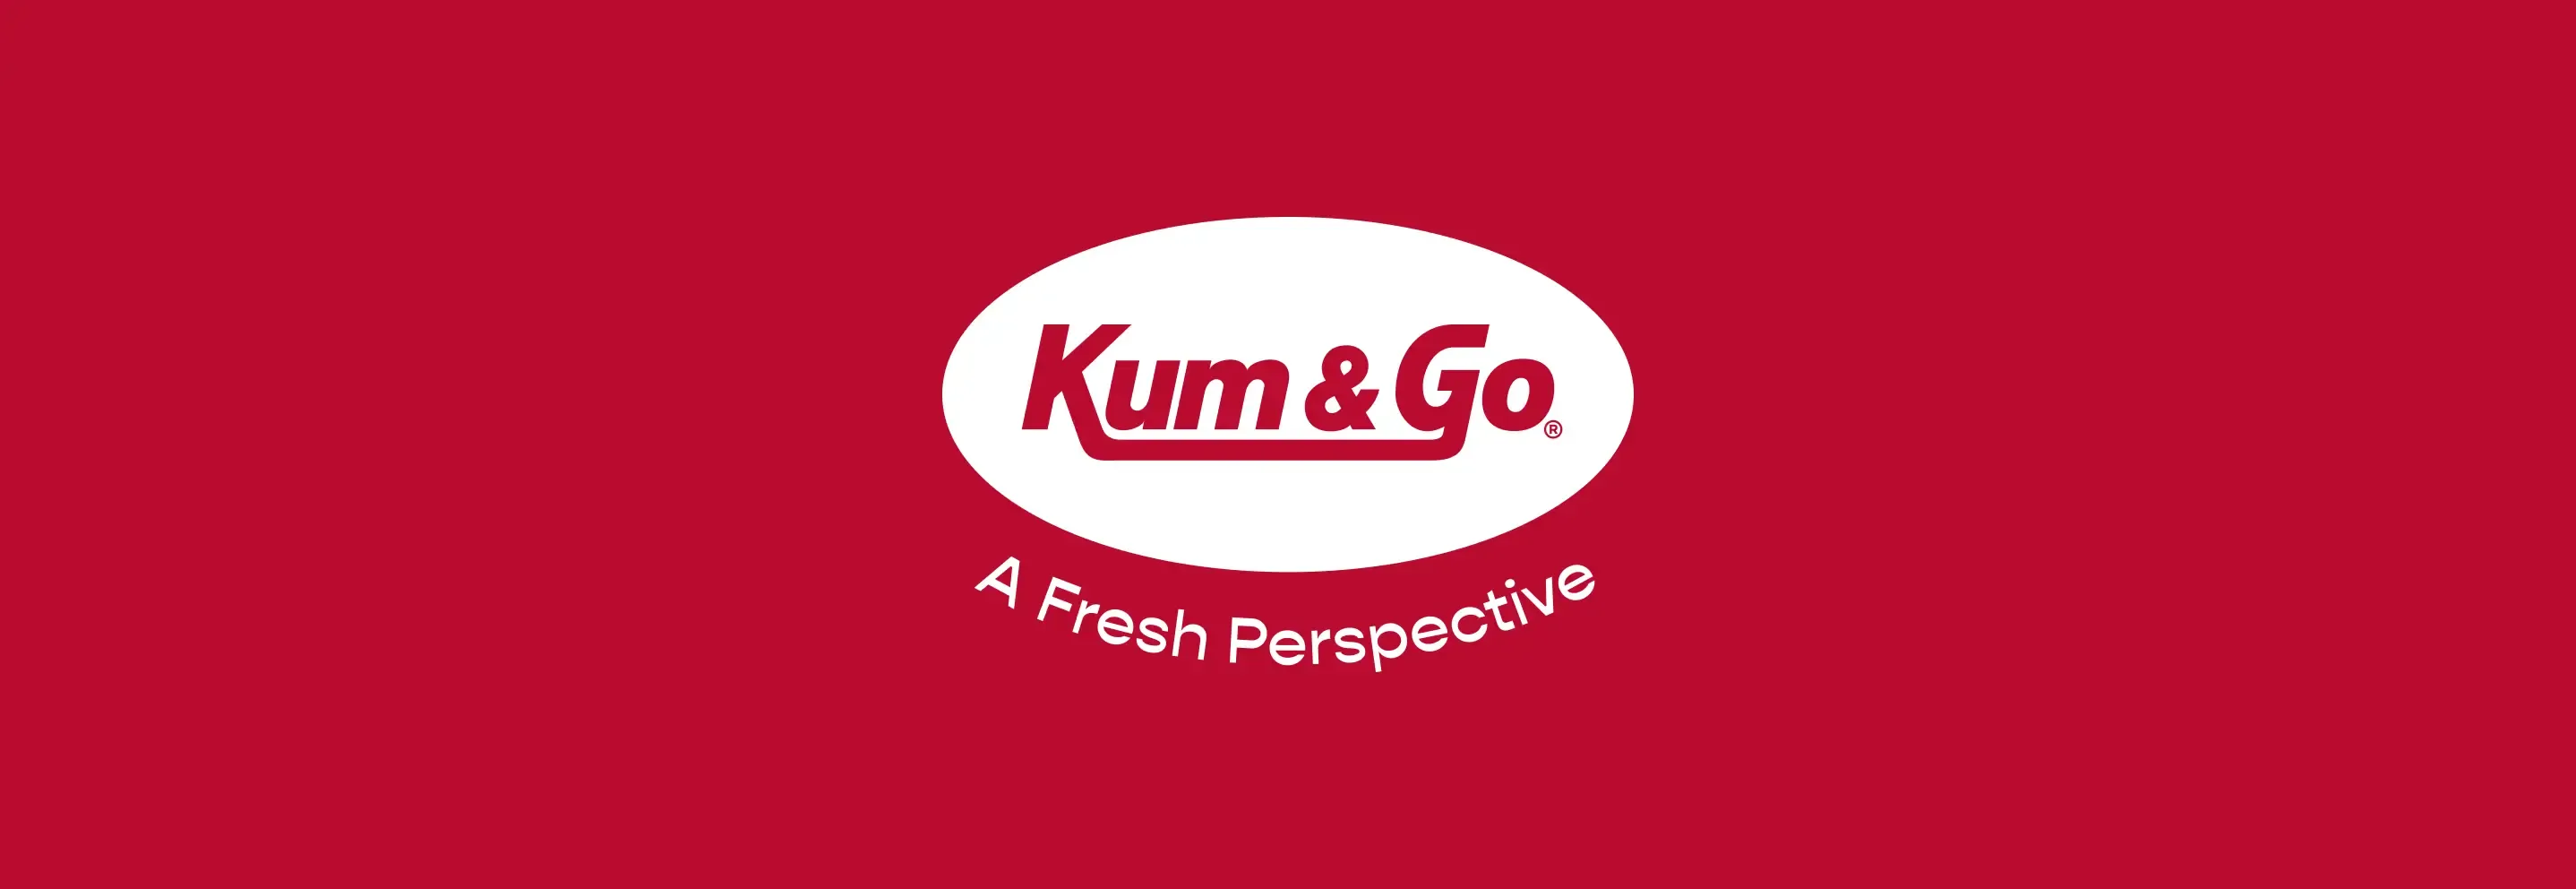 Kum & Go opens first store in Grand Rapids market